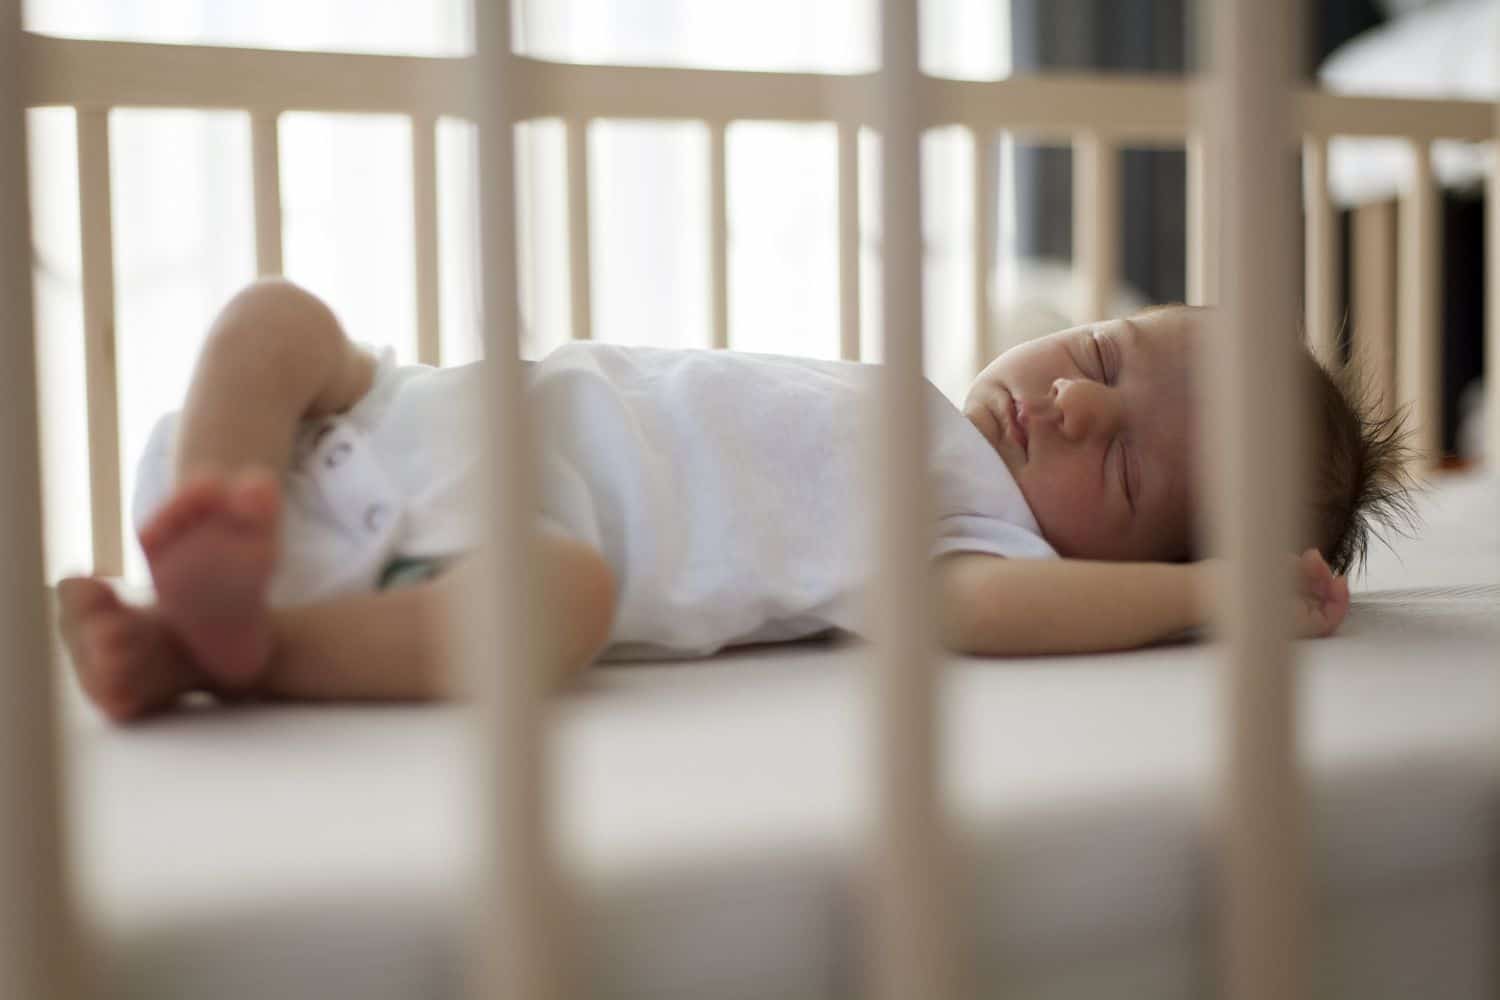 A serene baby sleeping soundly in a crib, following the Do's and Don'ts for a safe sleep environment